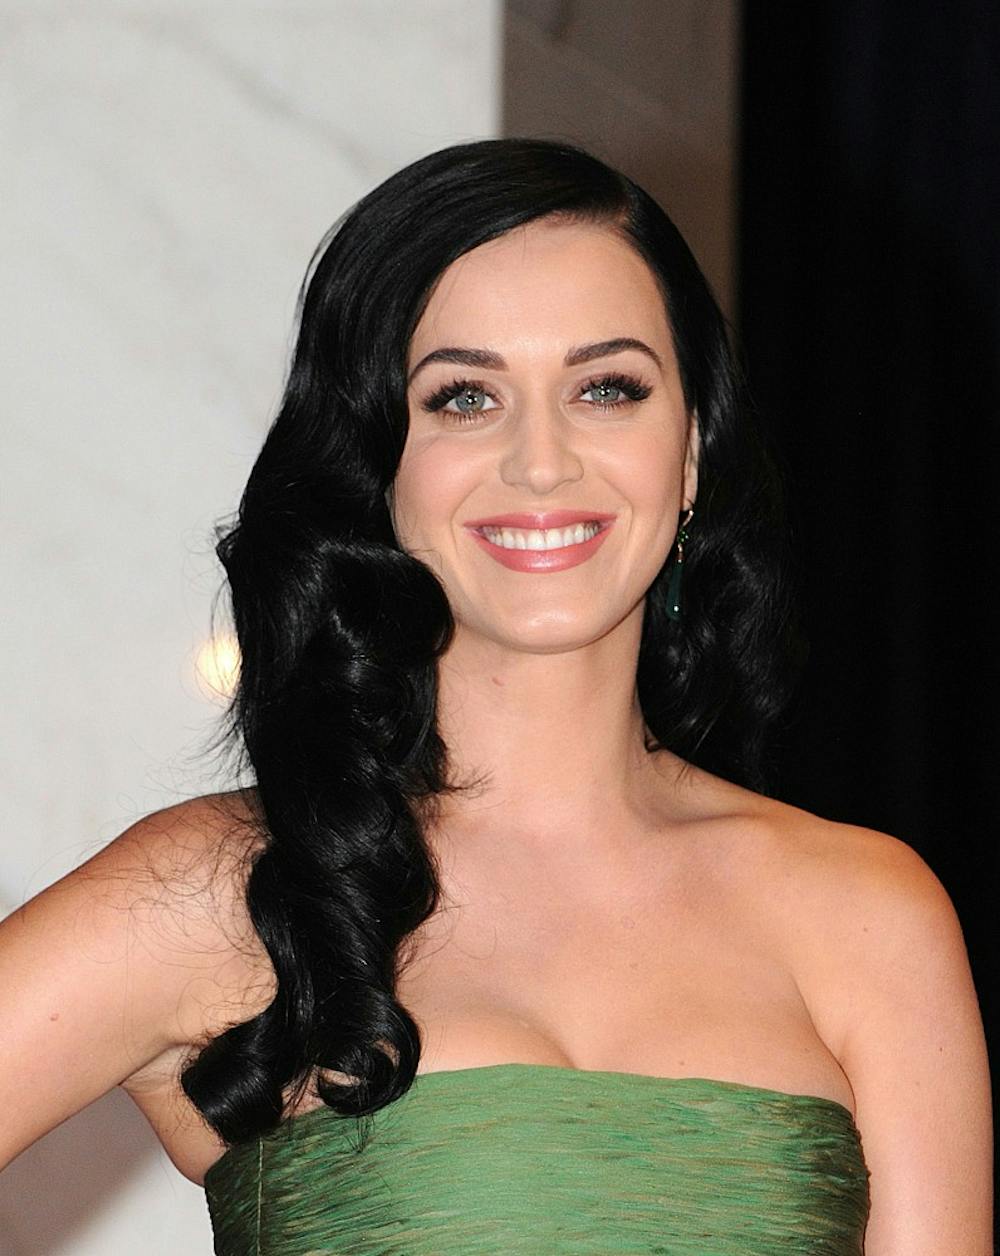 Katy Perry arrives for the White House Correspondents' Association dinner in Washington, D.C., on Saturday, April 27, 2013. The 99th annual dinner raises money for scholarships and honors the recipients of the organization's journalism awards. MCT PHOTO